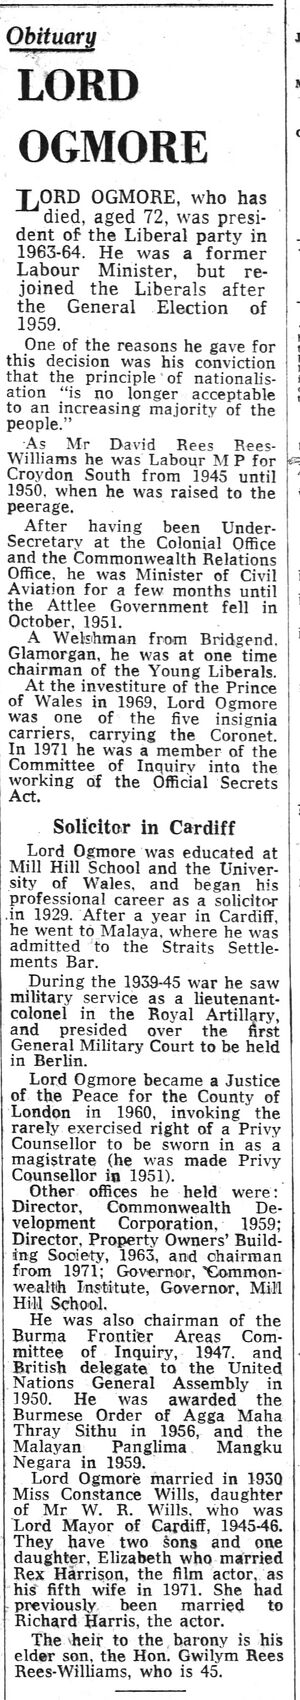 Obituary David Rees Rees-Williams, Lord Ogmore (age 72) · London, England · 1 September 1976